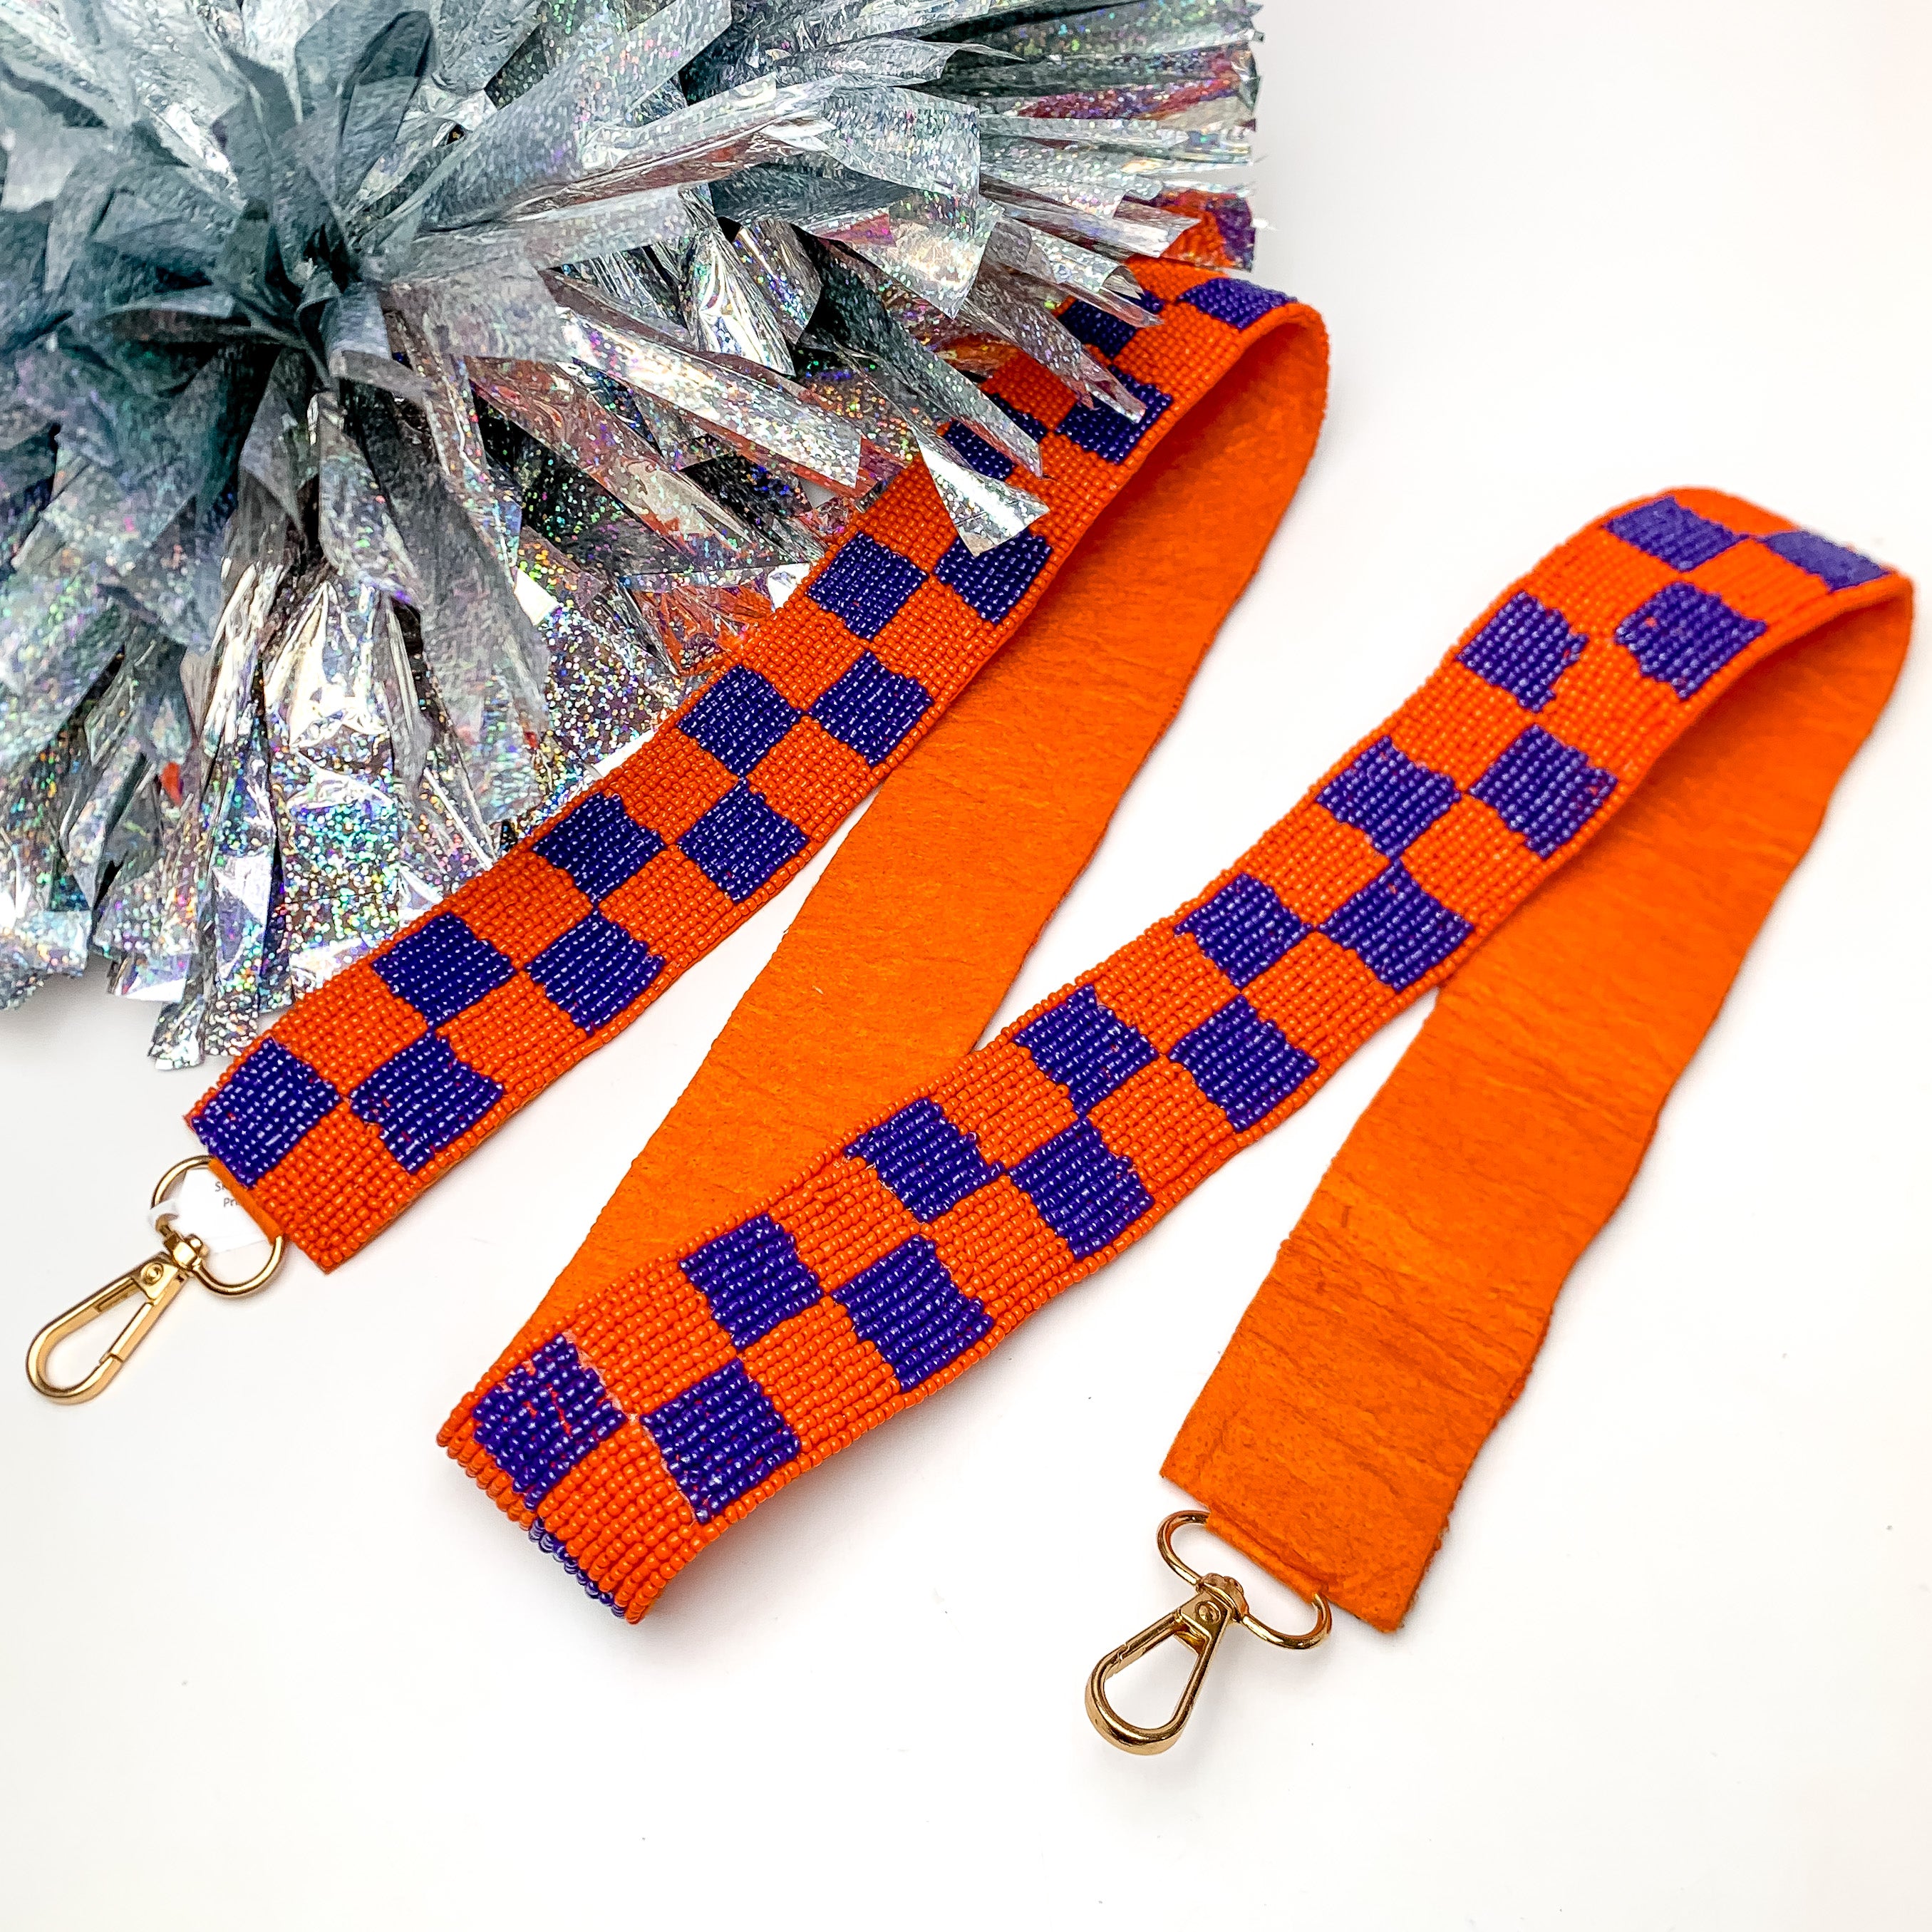 Game Day! Checkered Beaded Purse Strap in Orange and Blue. This purse strap is pictured on a white background with a silver pom pom next to it.